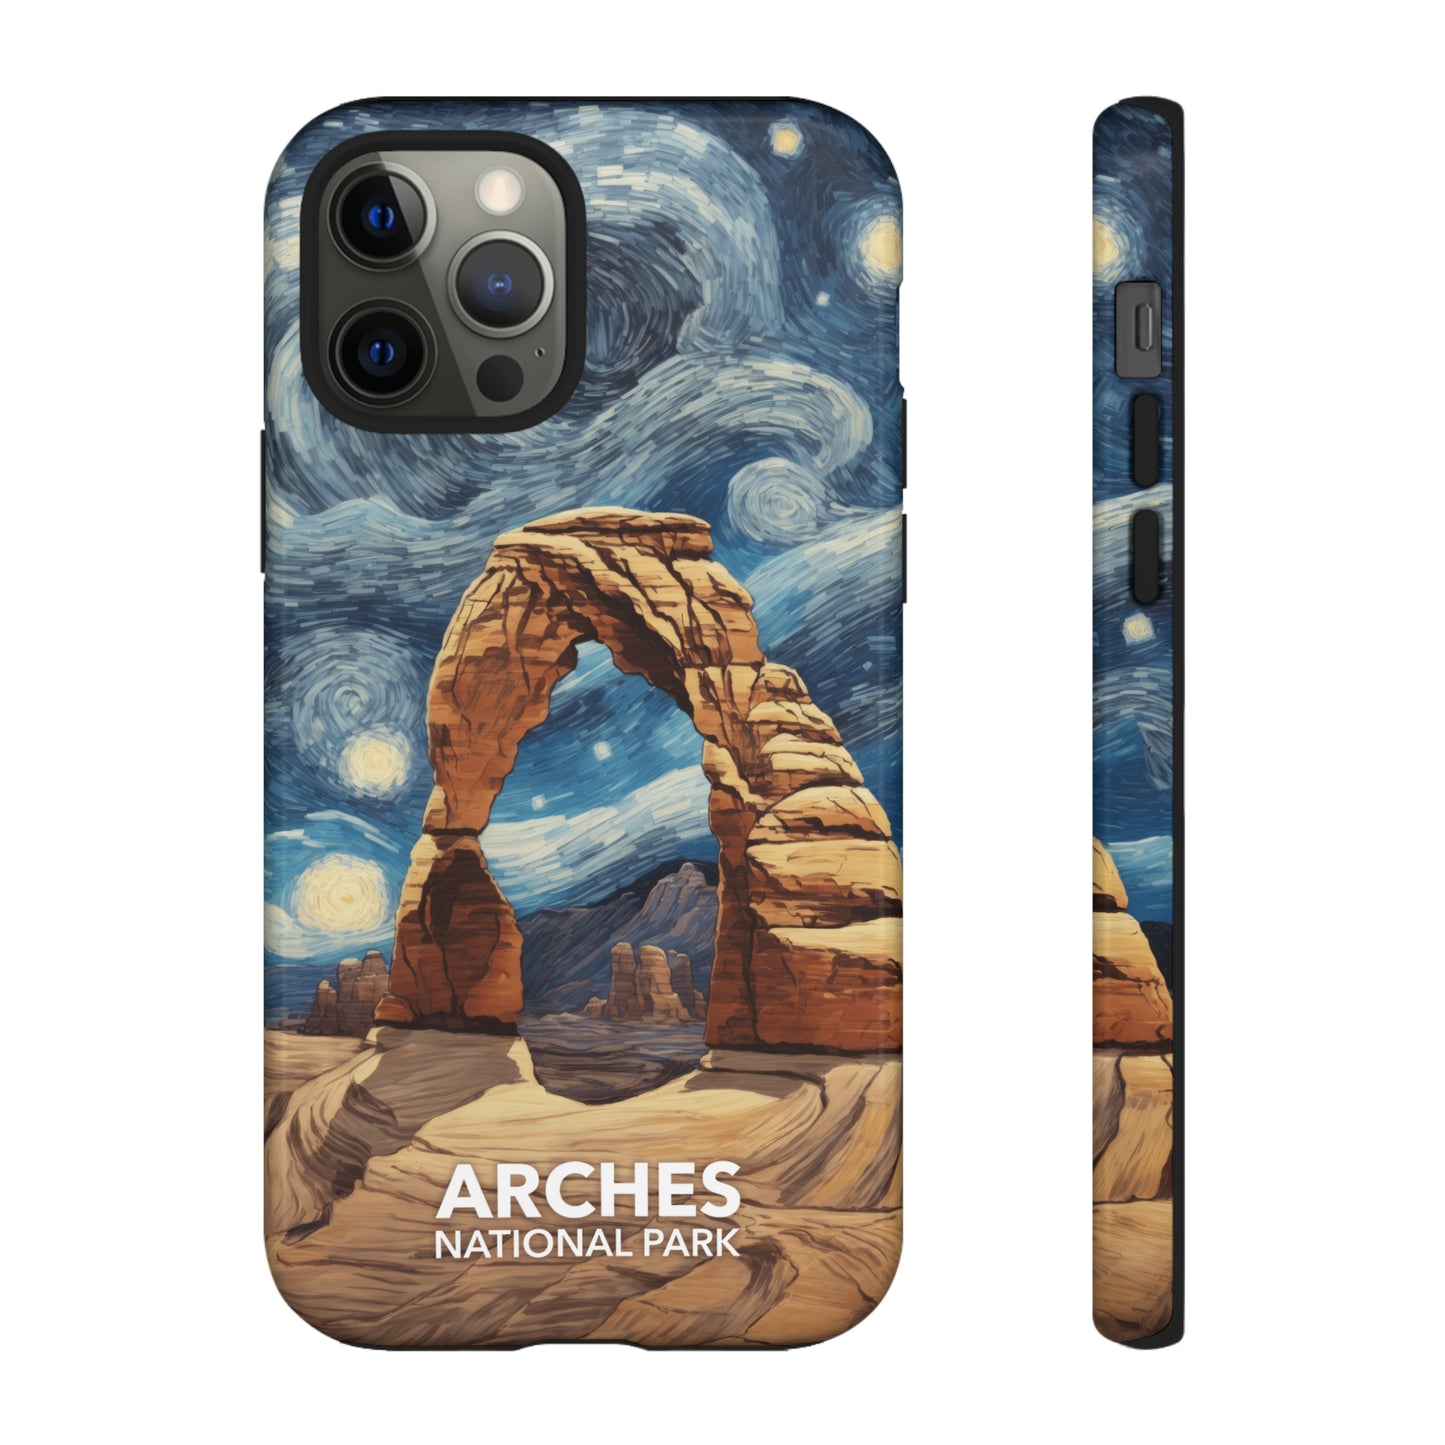 Arches National Park Phone Case - Starry Night